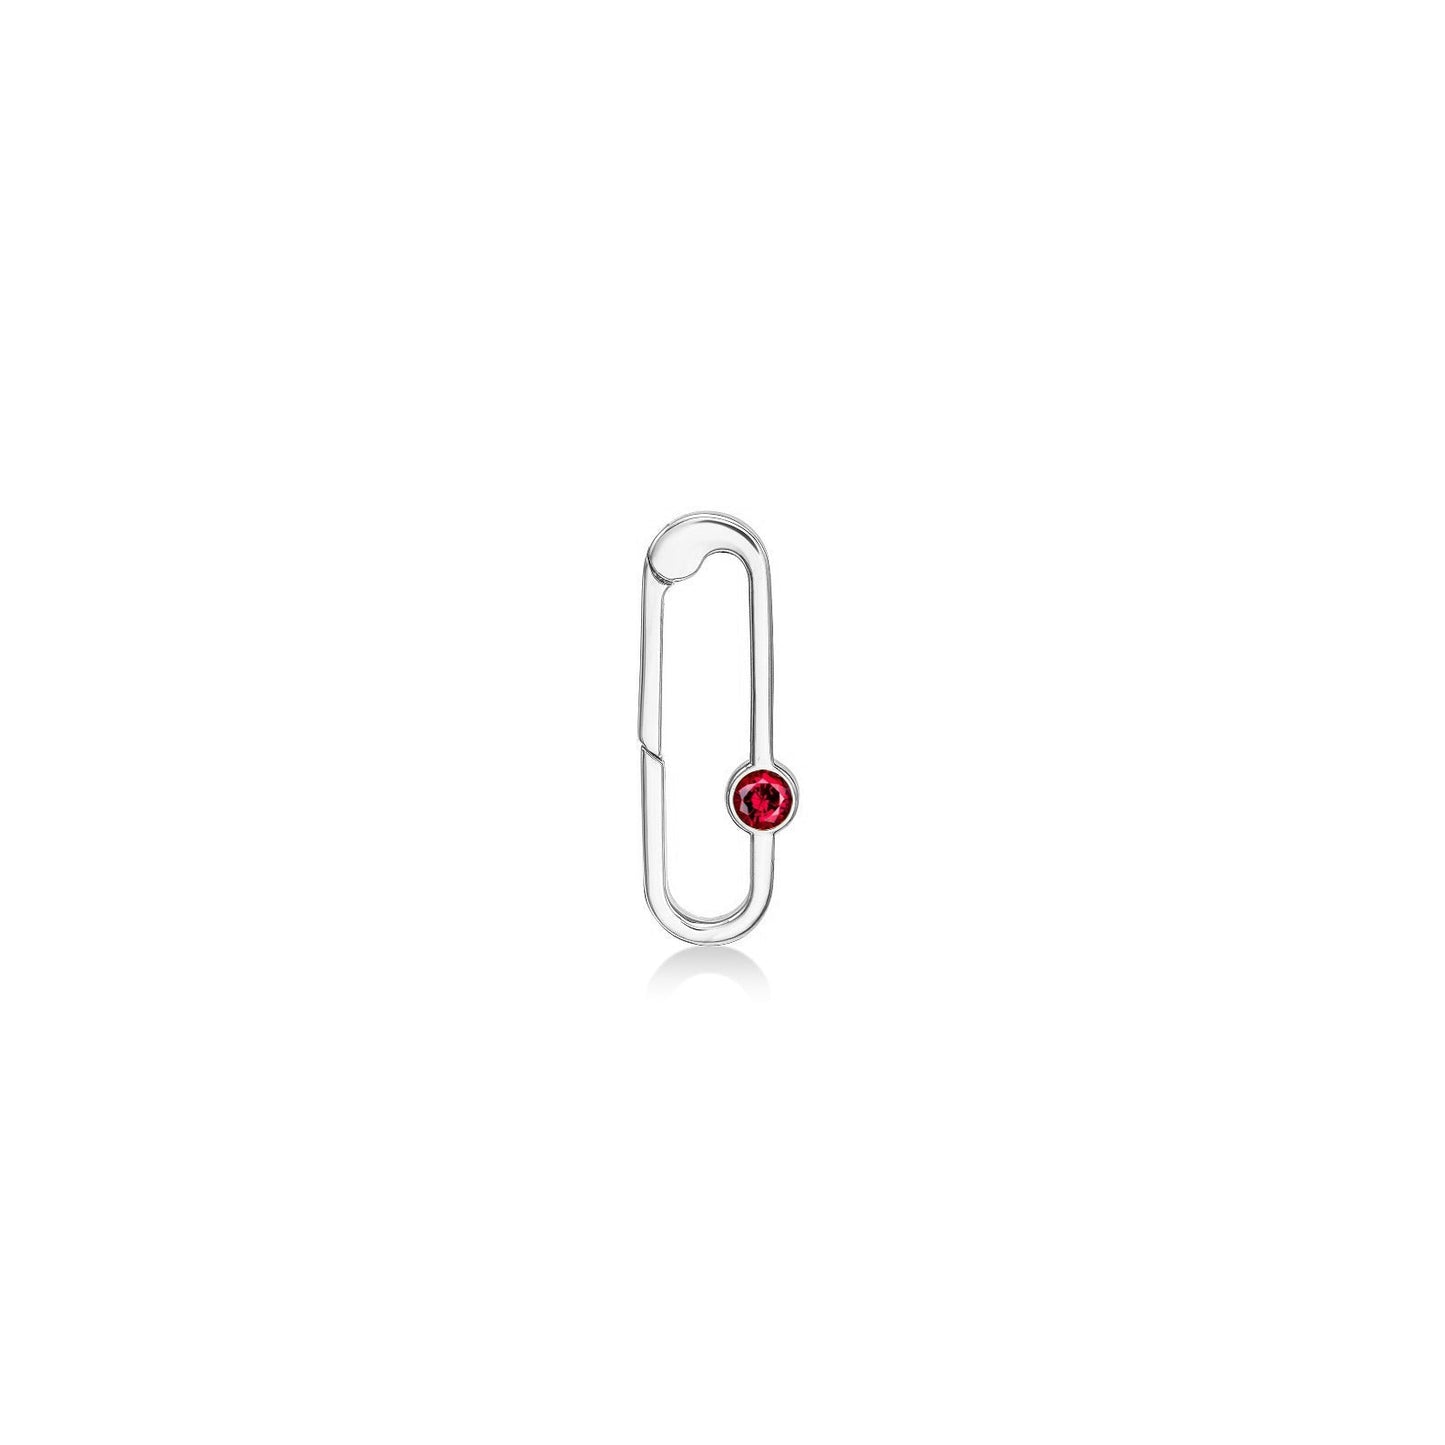 14k white gold paperclip charm lock with ruby